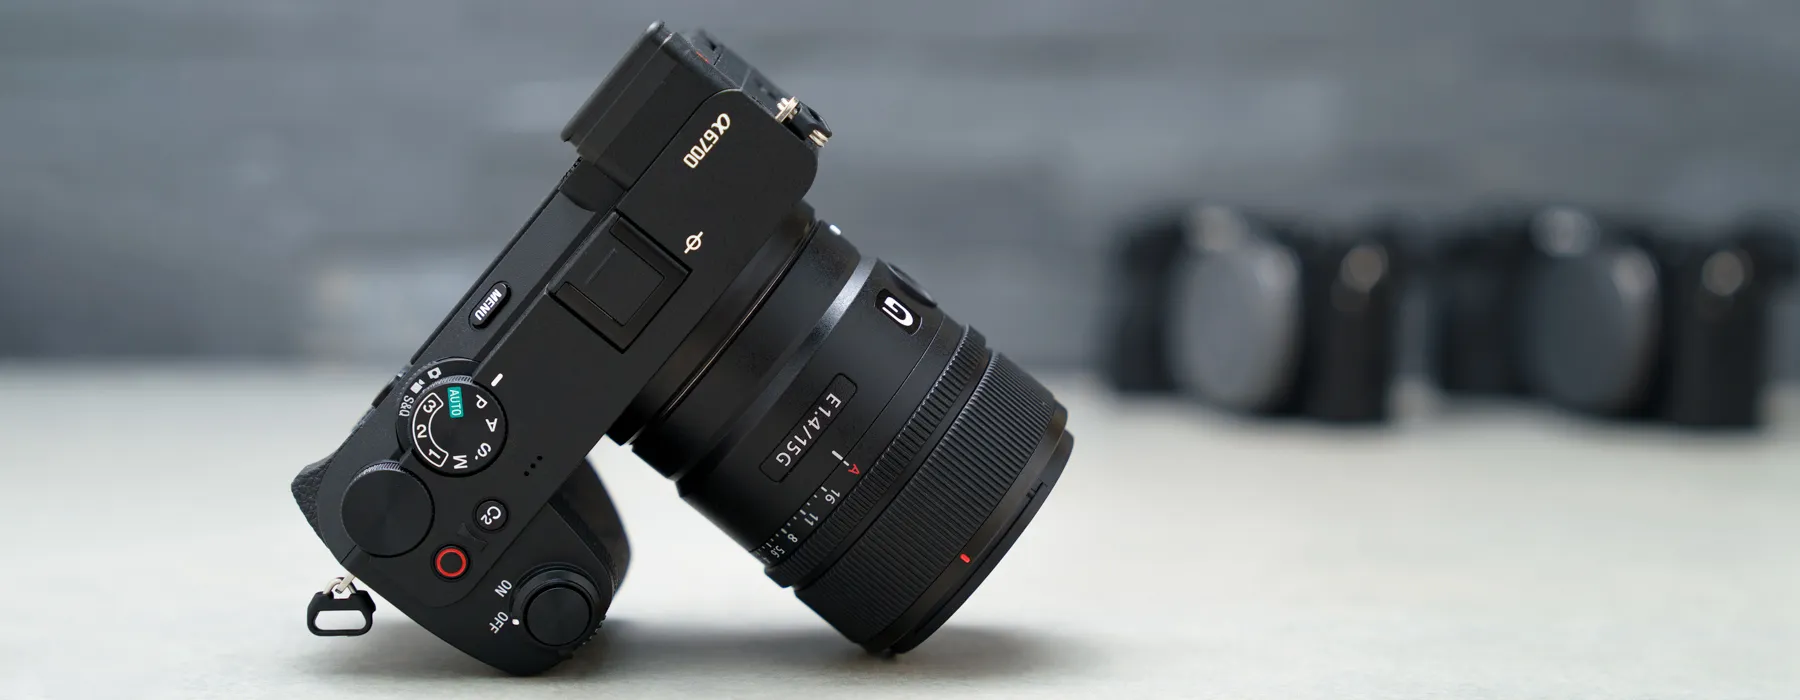 A6700 Hands-On Review